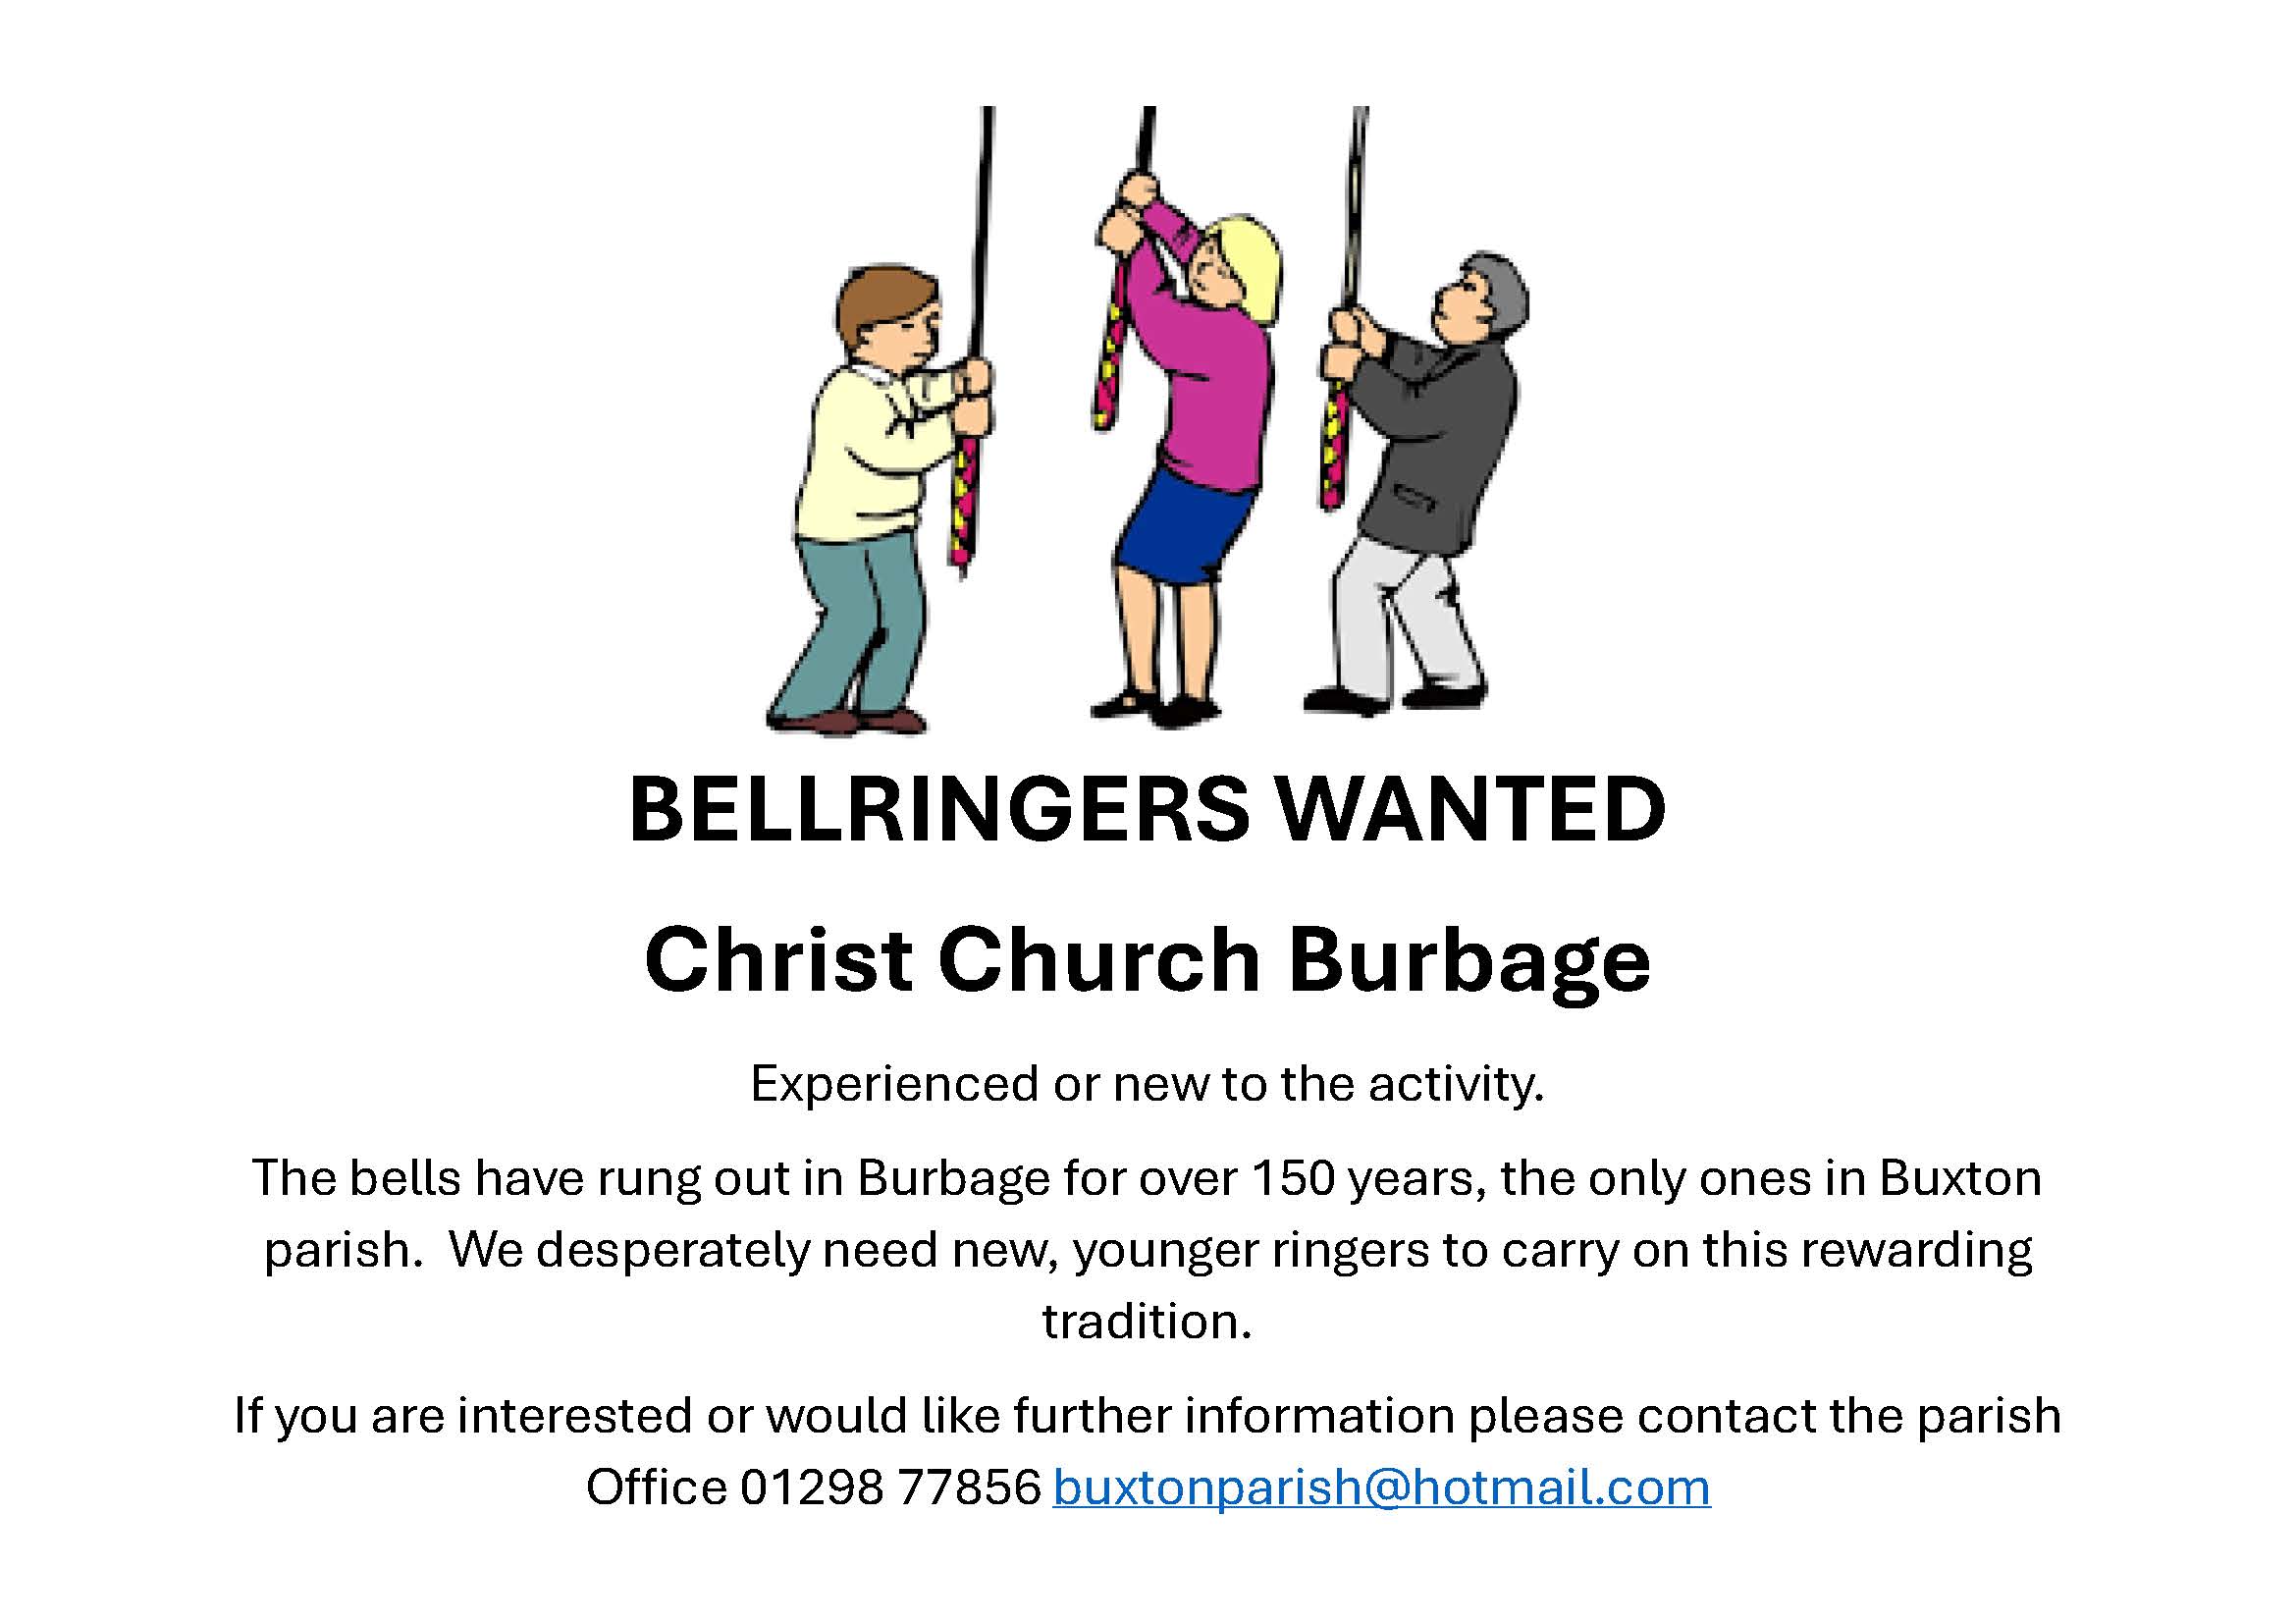 Appeal for Bell Ringers